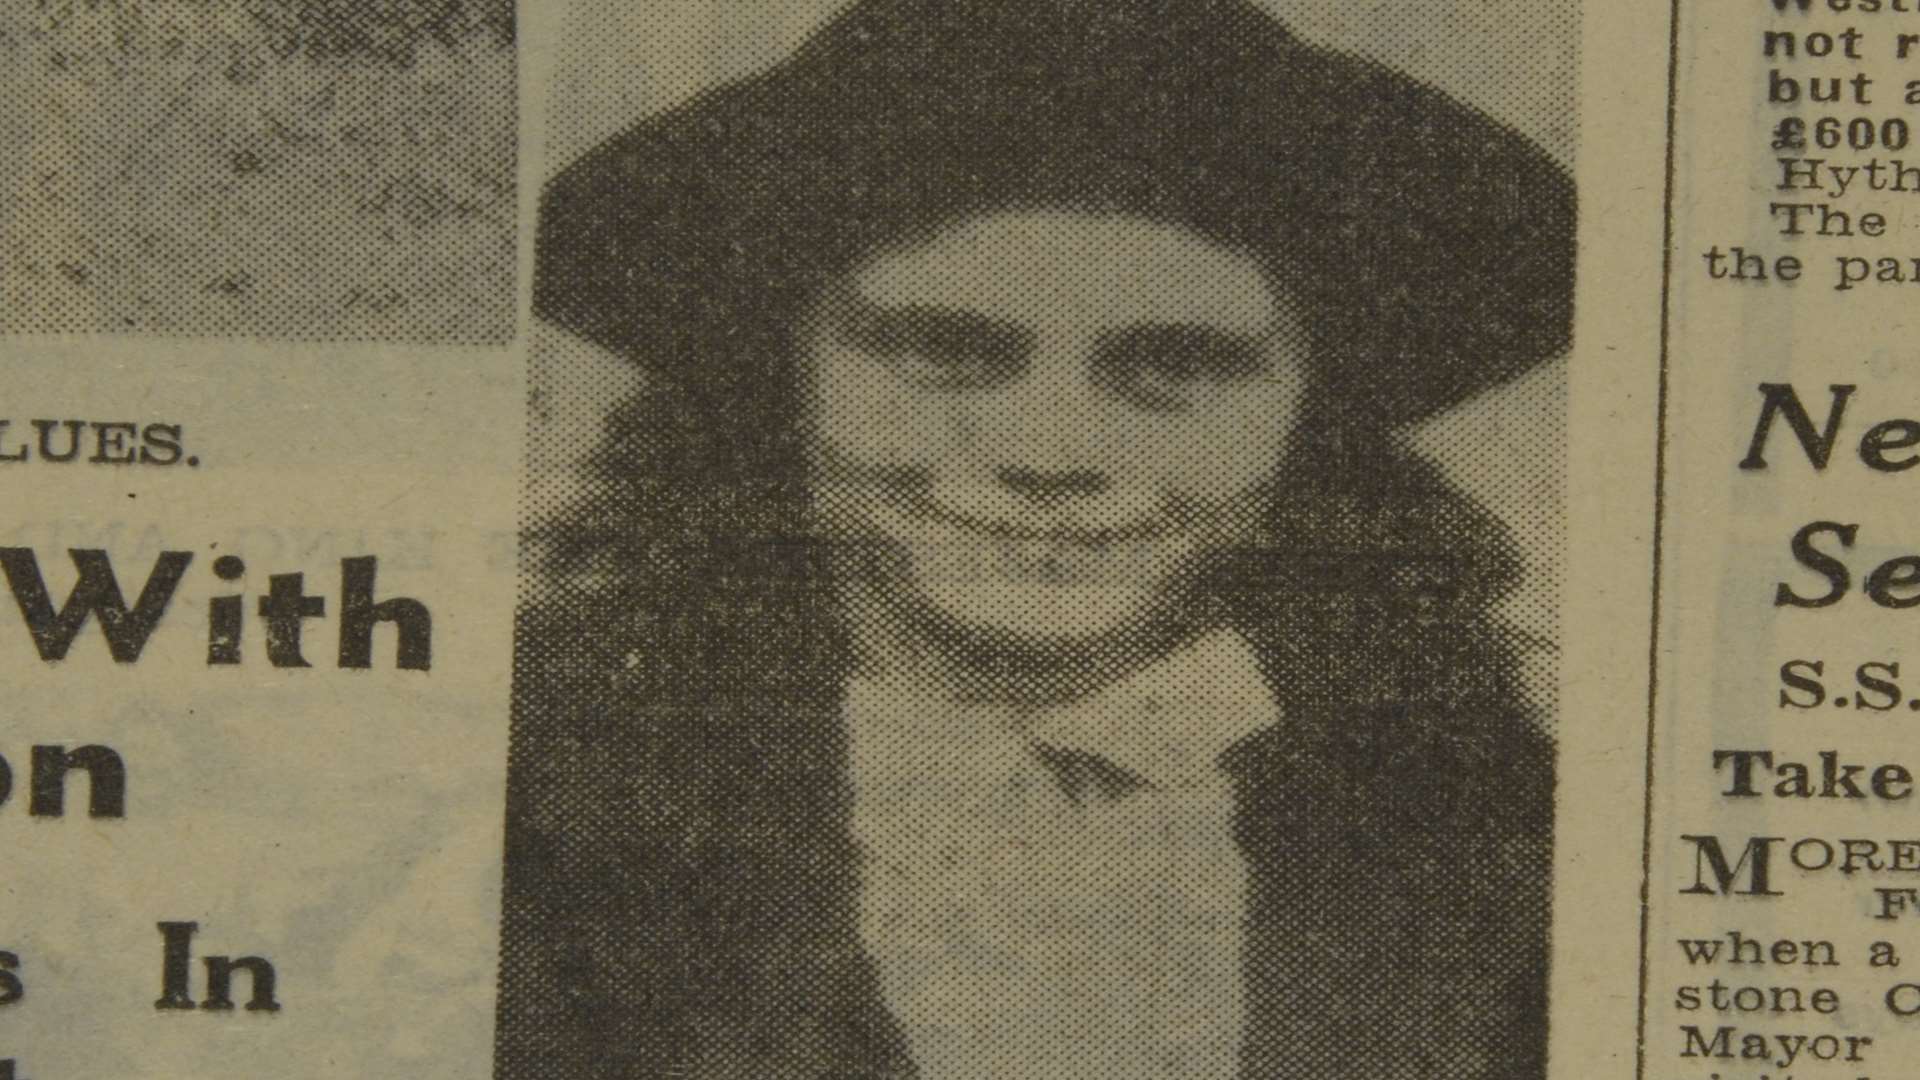 Sheila Martin, 11 years old of Fawkham Green, who was murdered in 1946